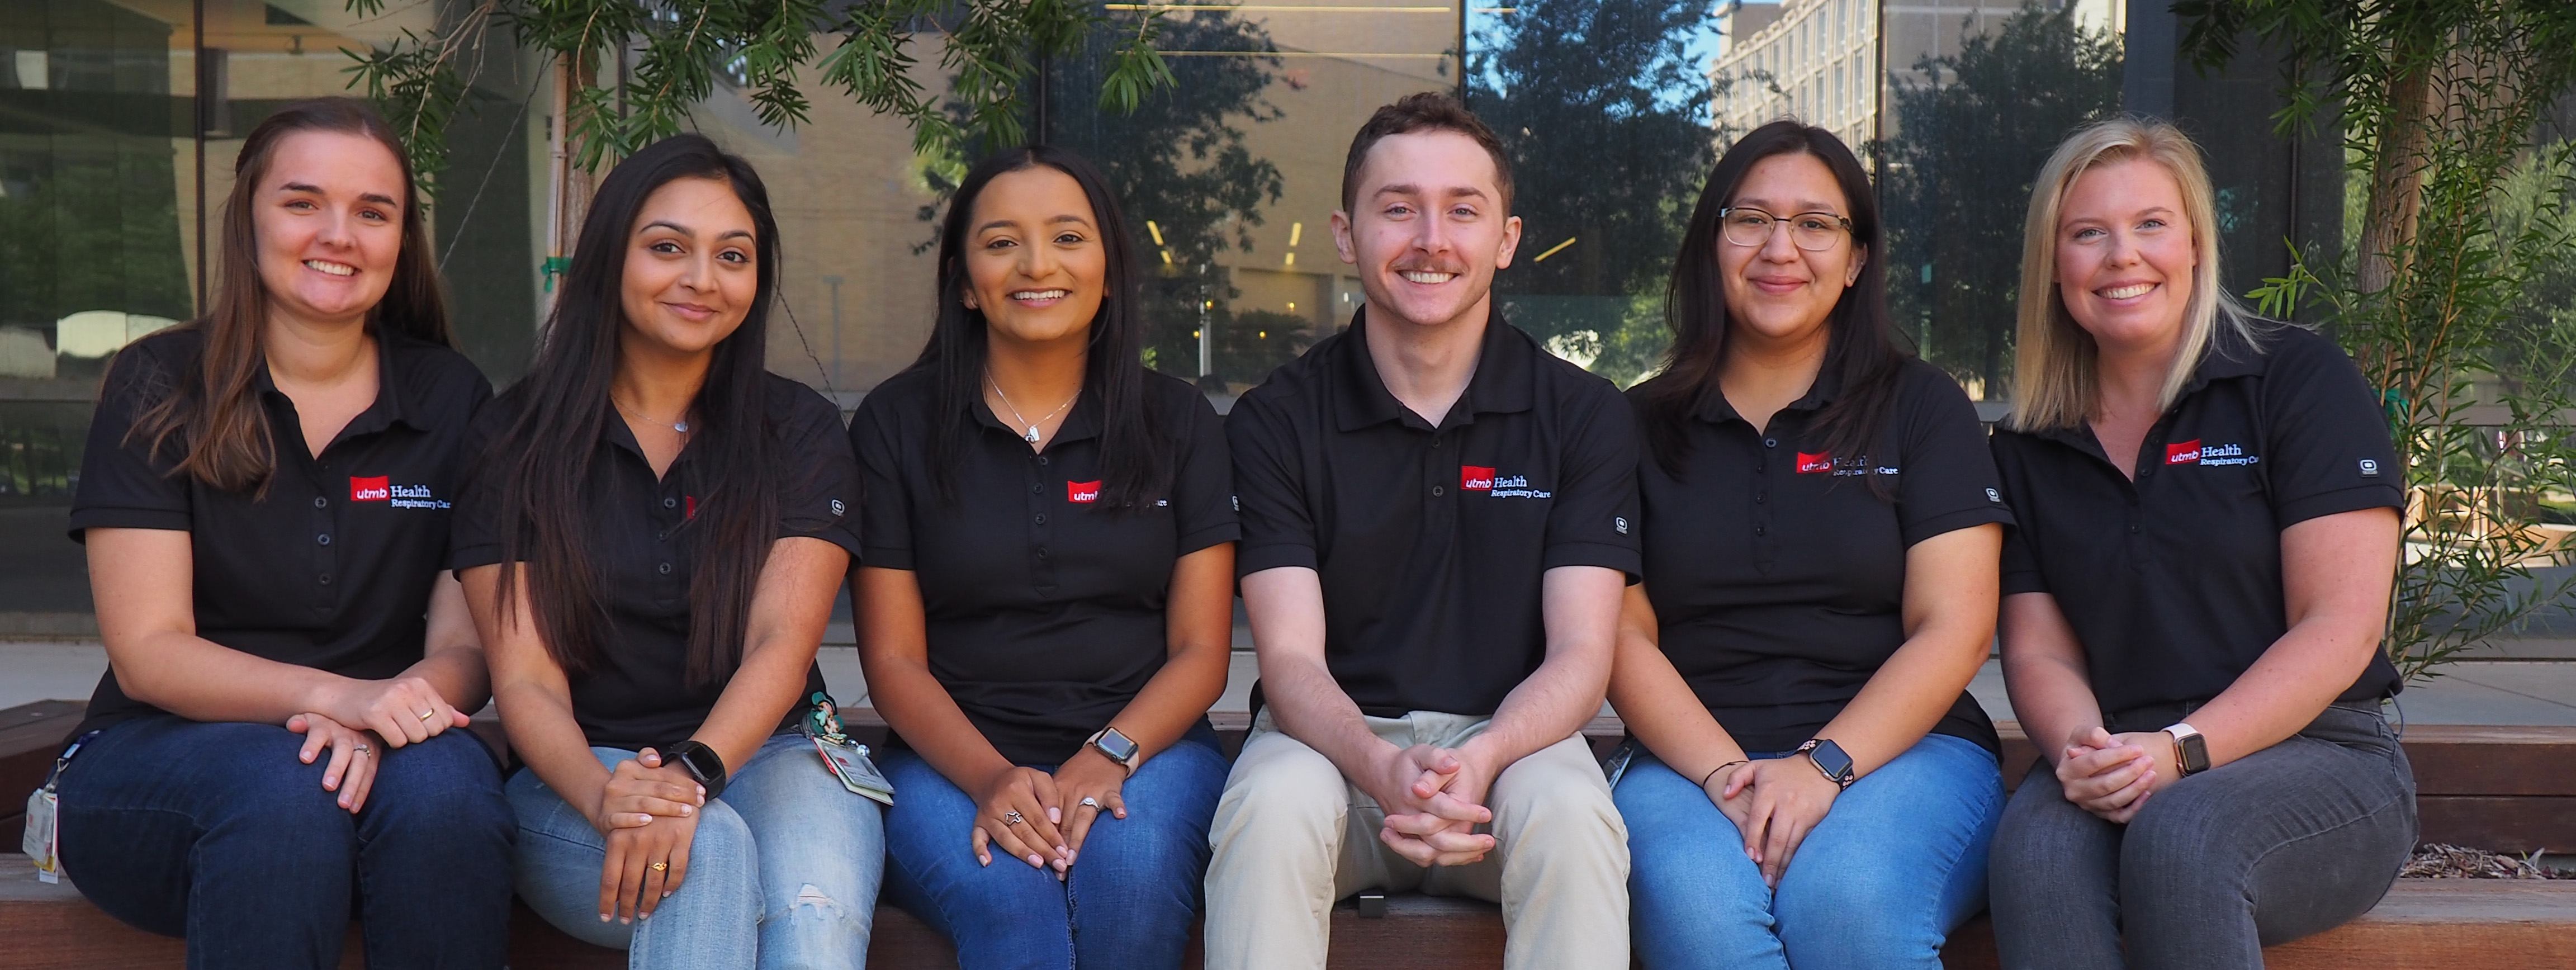 Six Respiratory Care Student Association organization officers smiling for the camera.